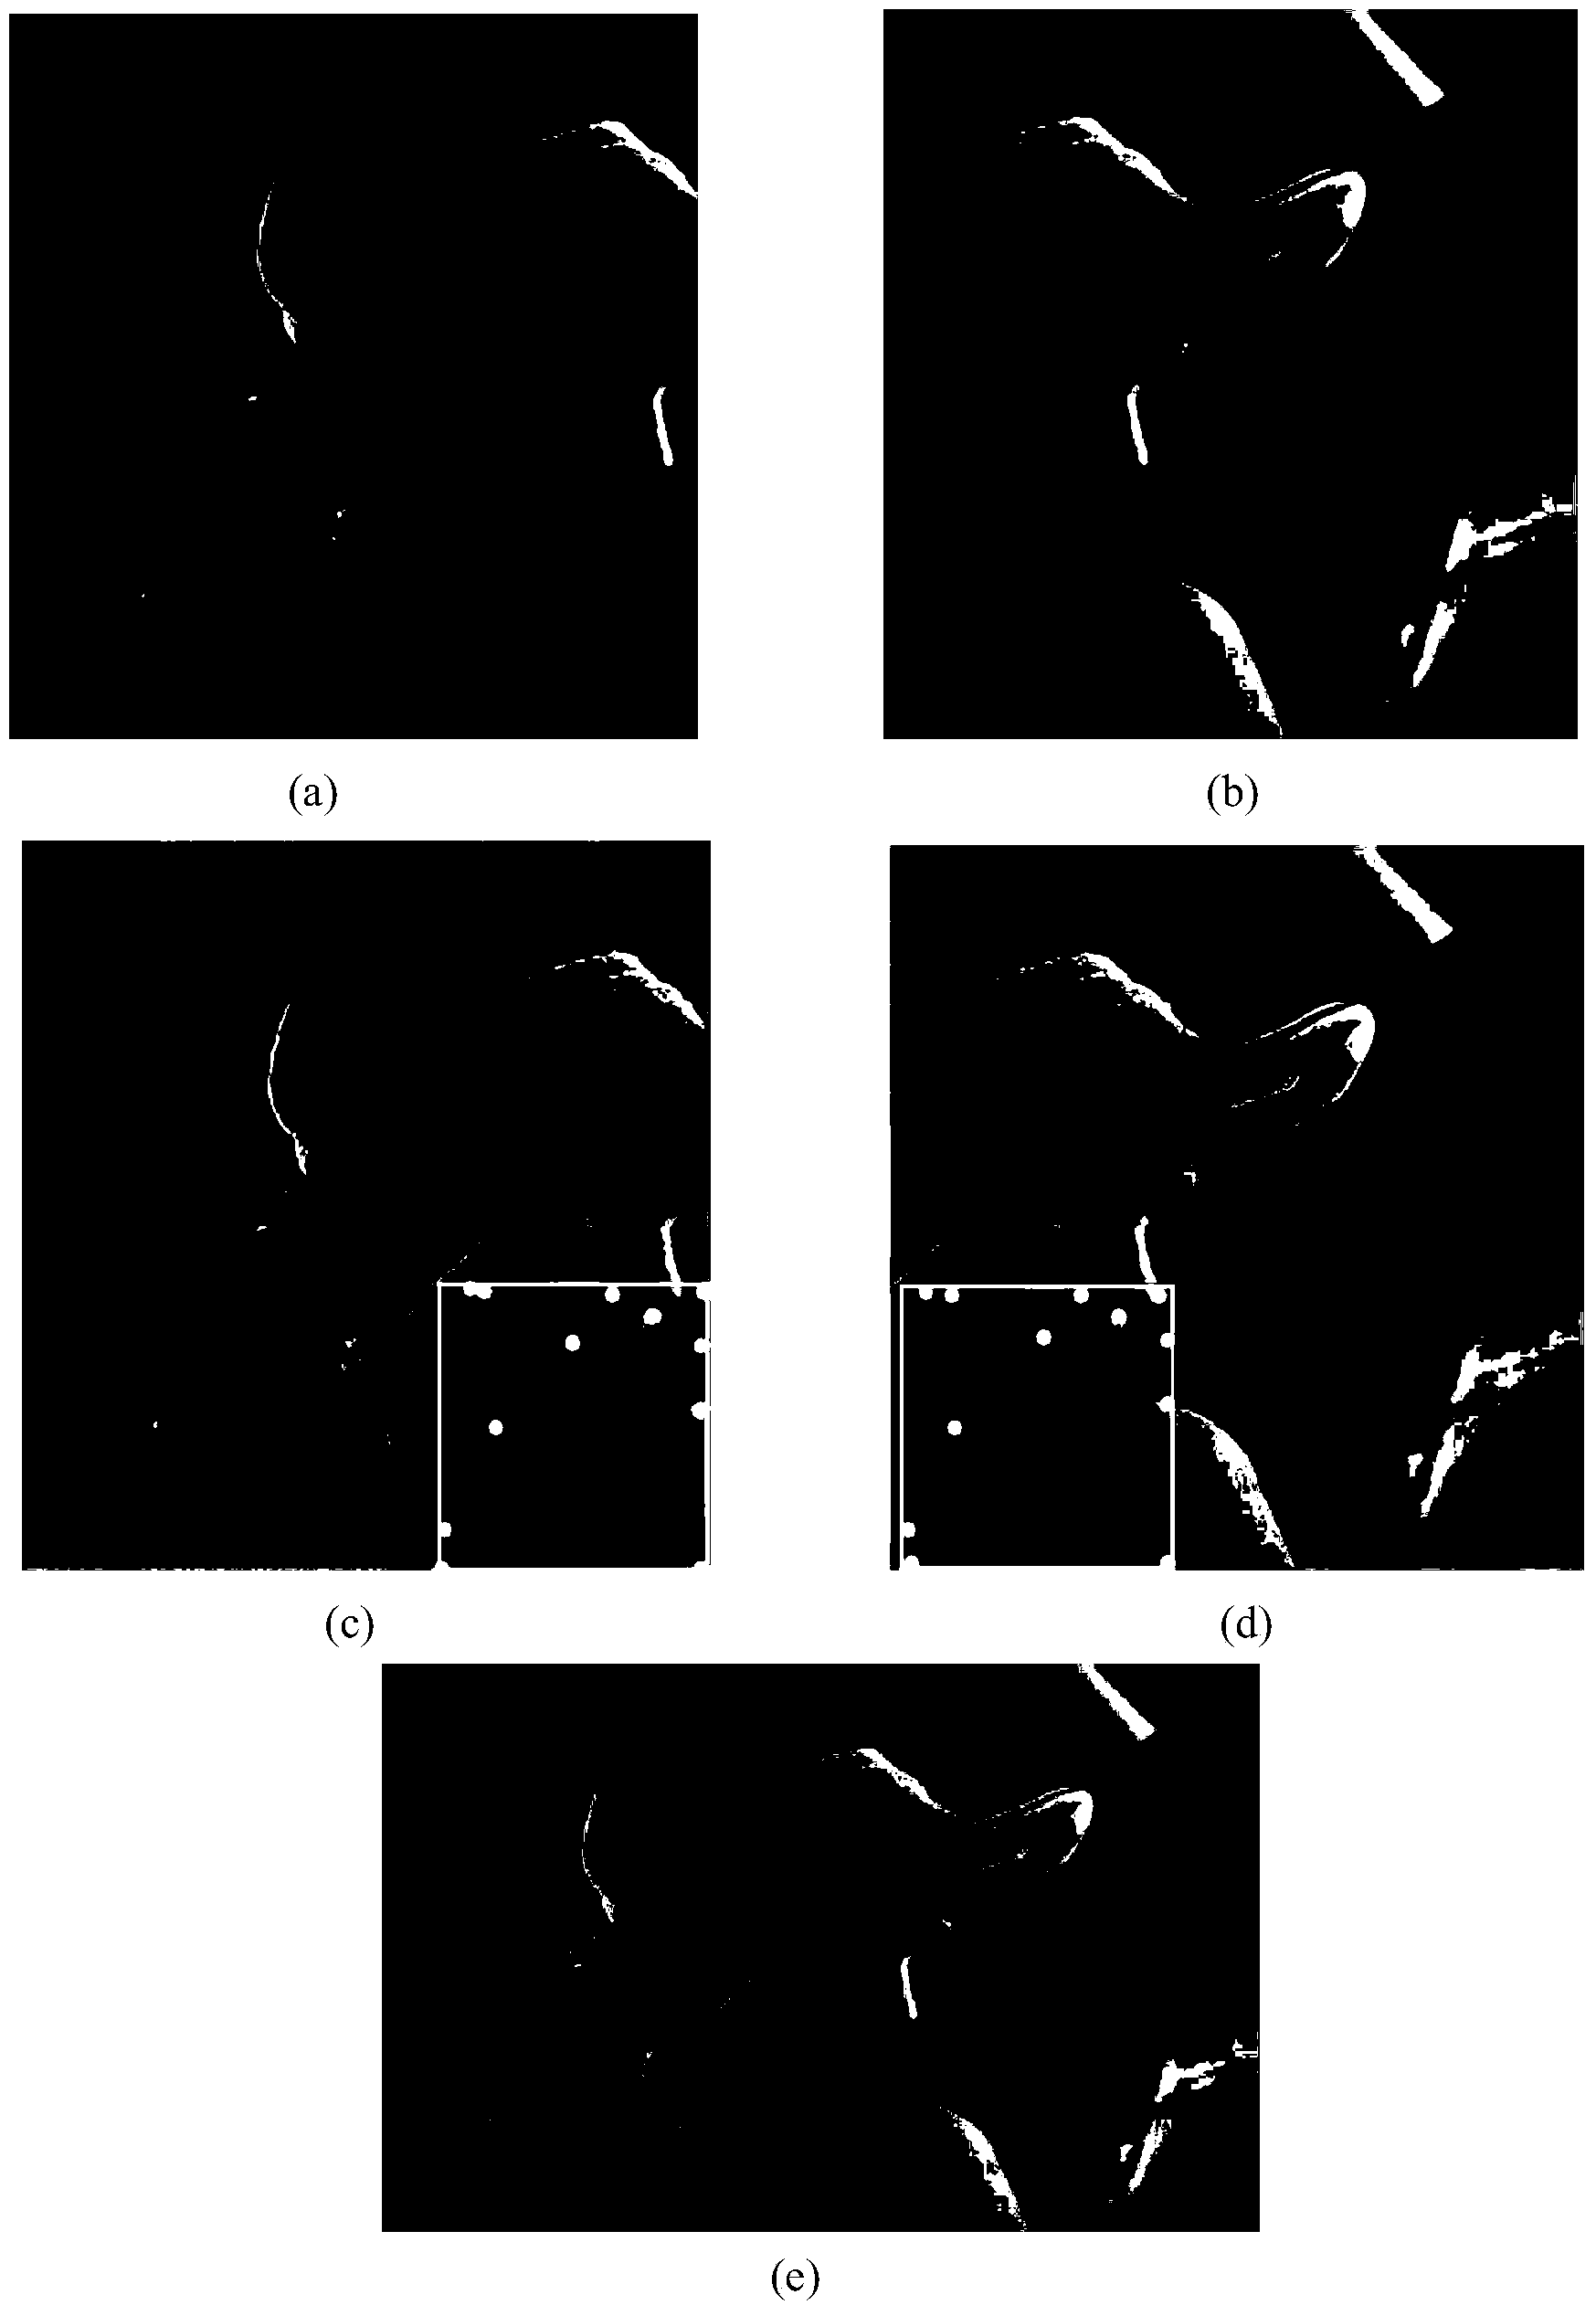 Image registration method based on mutual information and Harris corner point detection